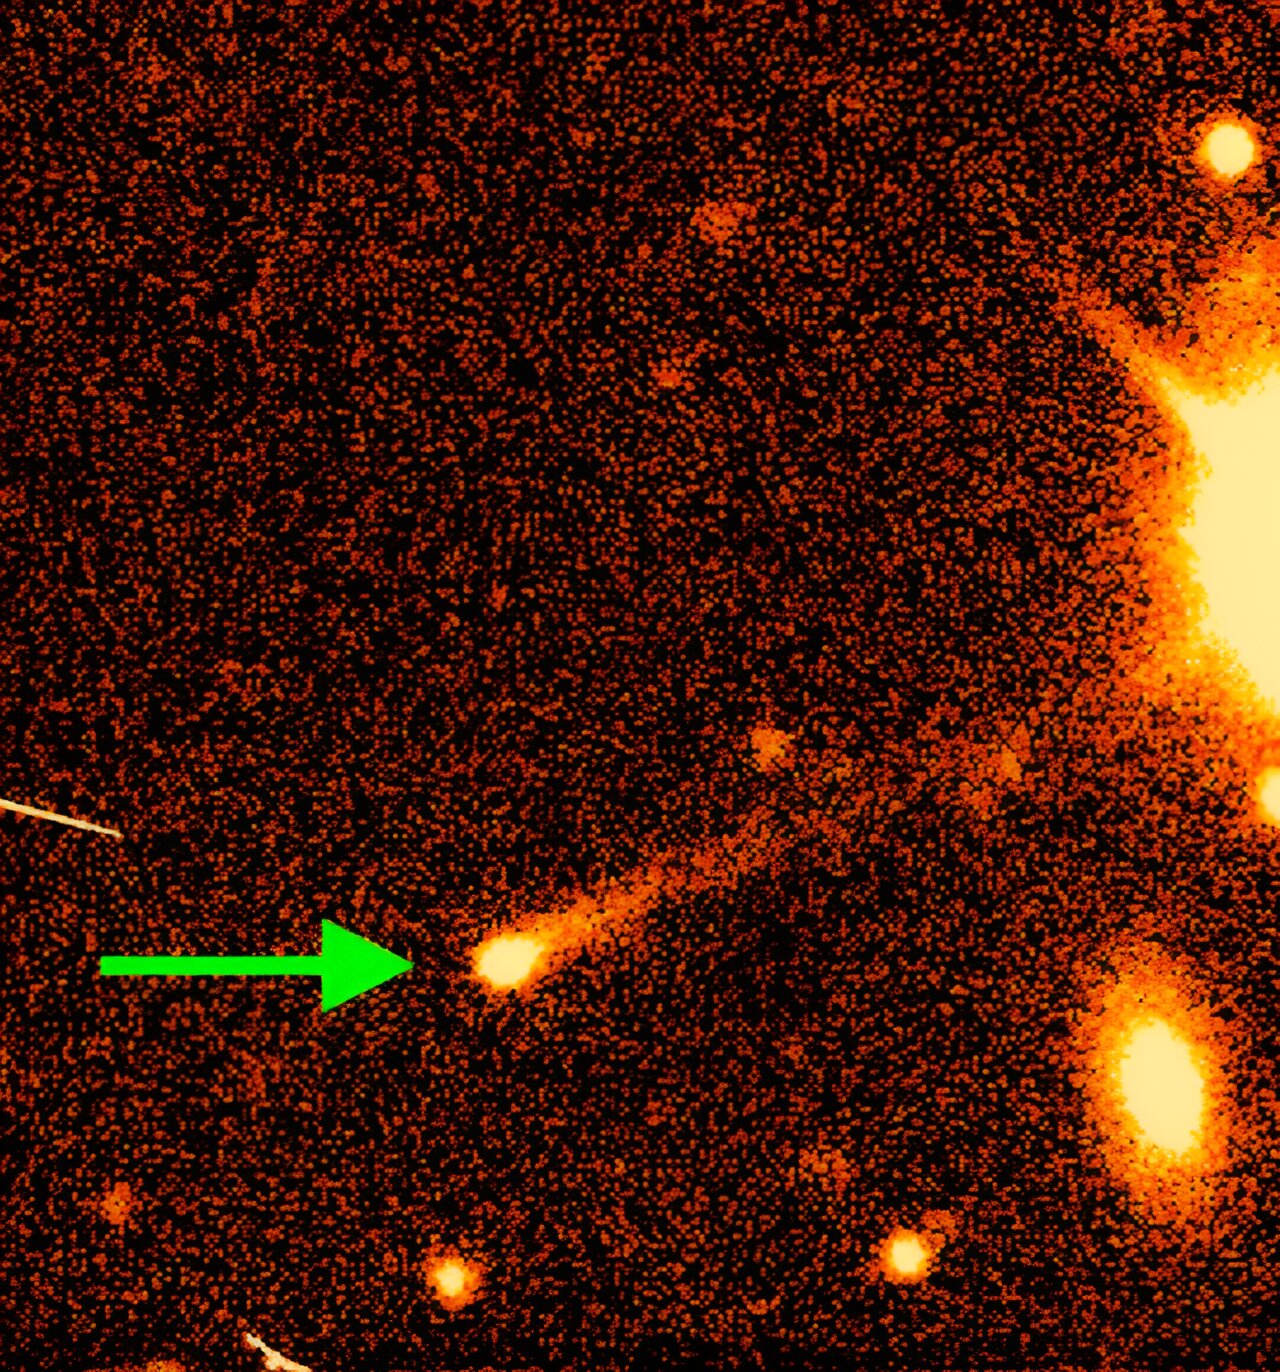 an image of space, with a green arrow pointing to an active asteroid